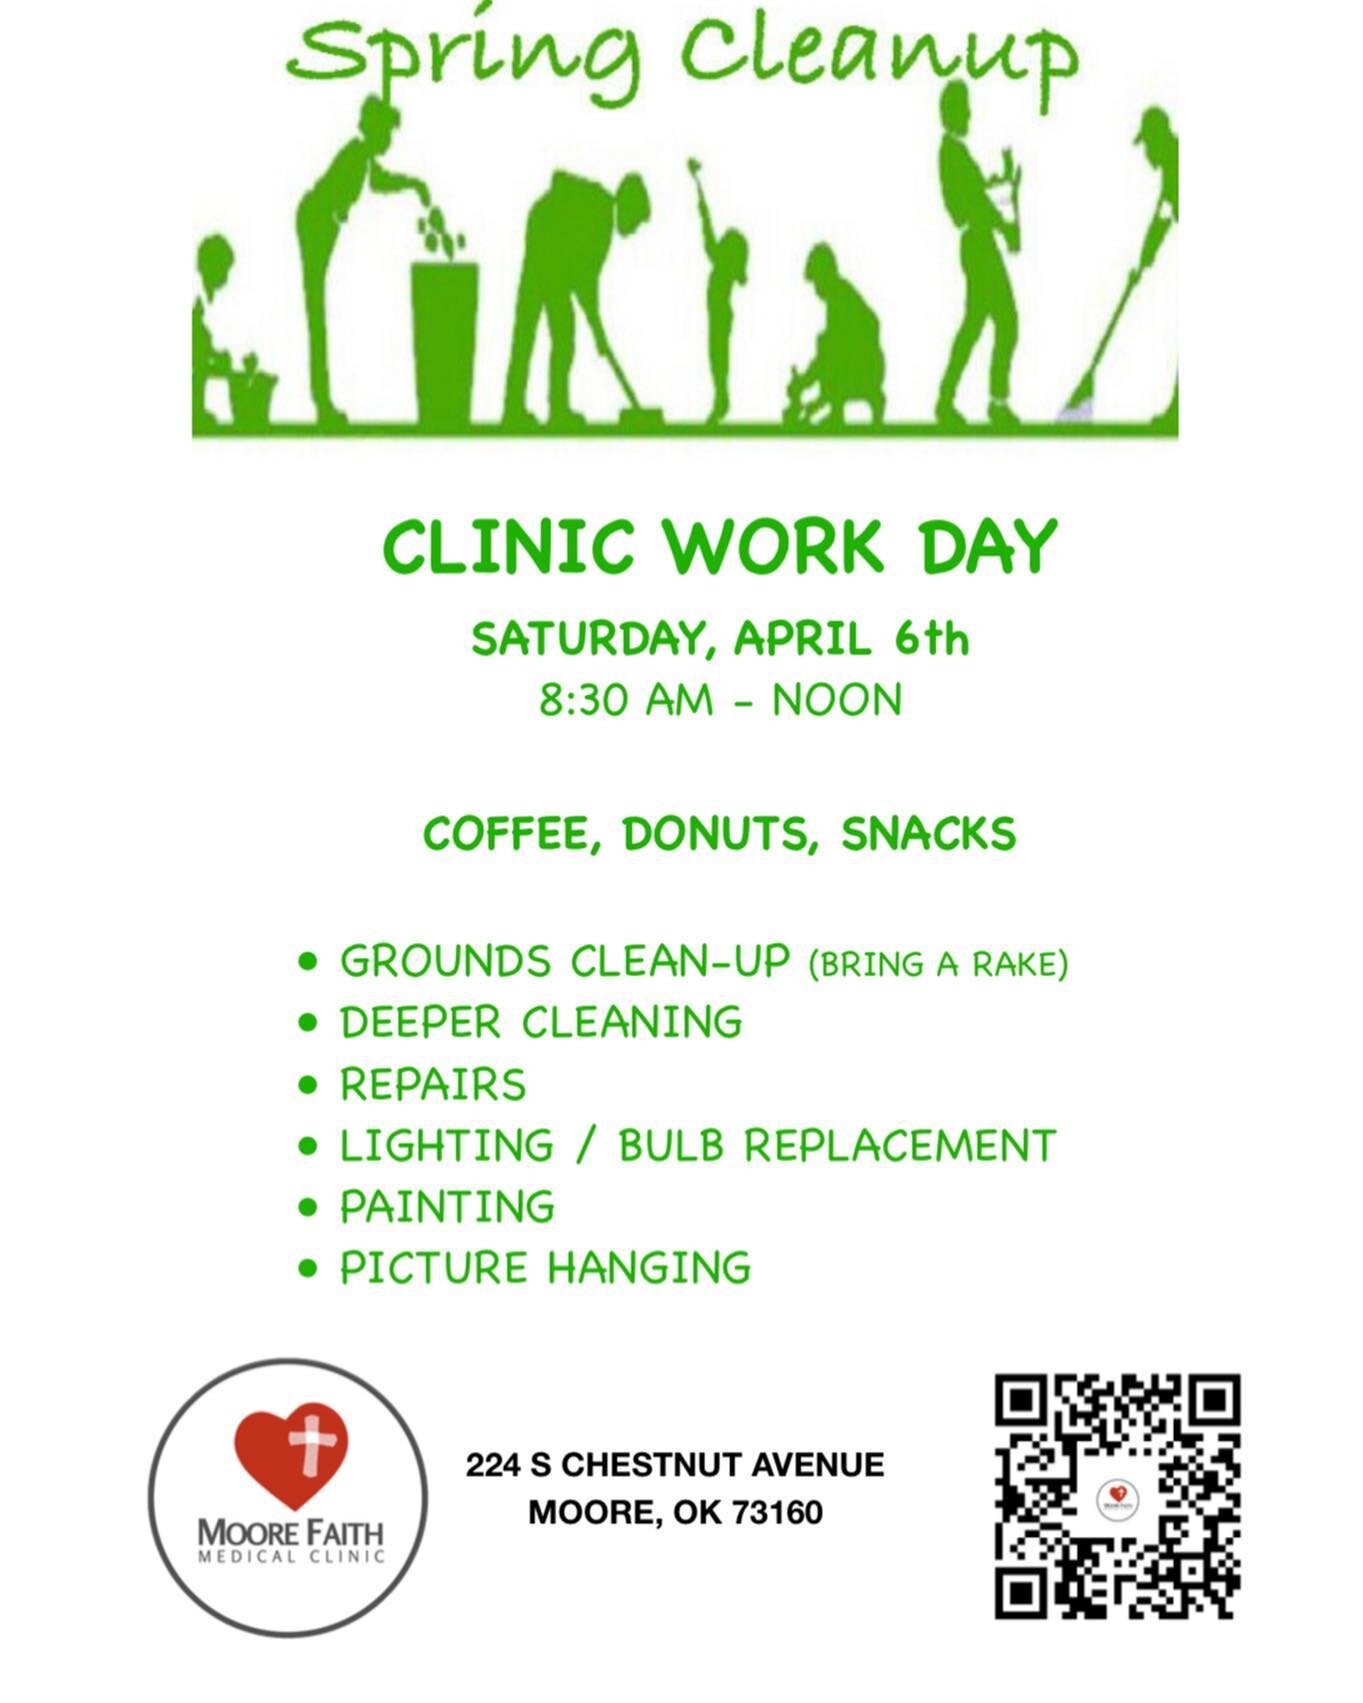 Clinic work day is coming up! We could use some help from a small group or two&mdash;especially with outside beautification around our building. Please text Dave at 405-312-6363 for more information. #loveyourneighbor #moorestrong #partnership #commu